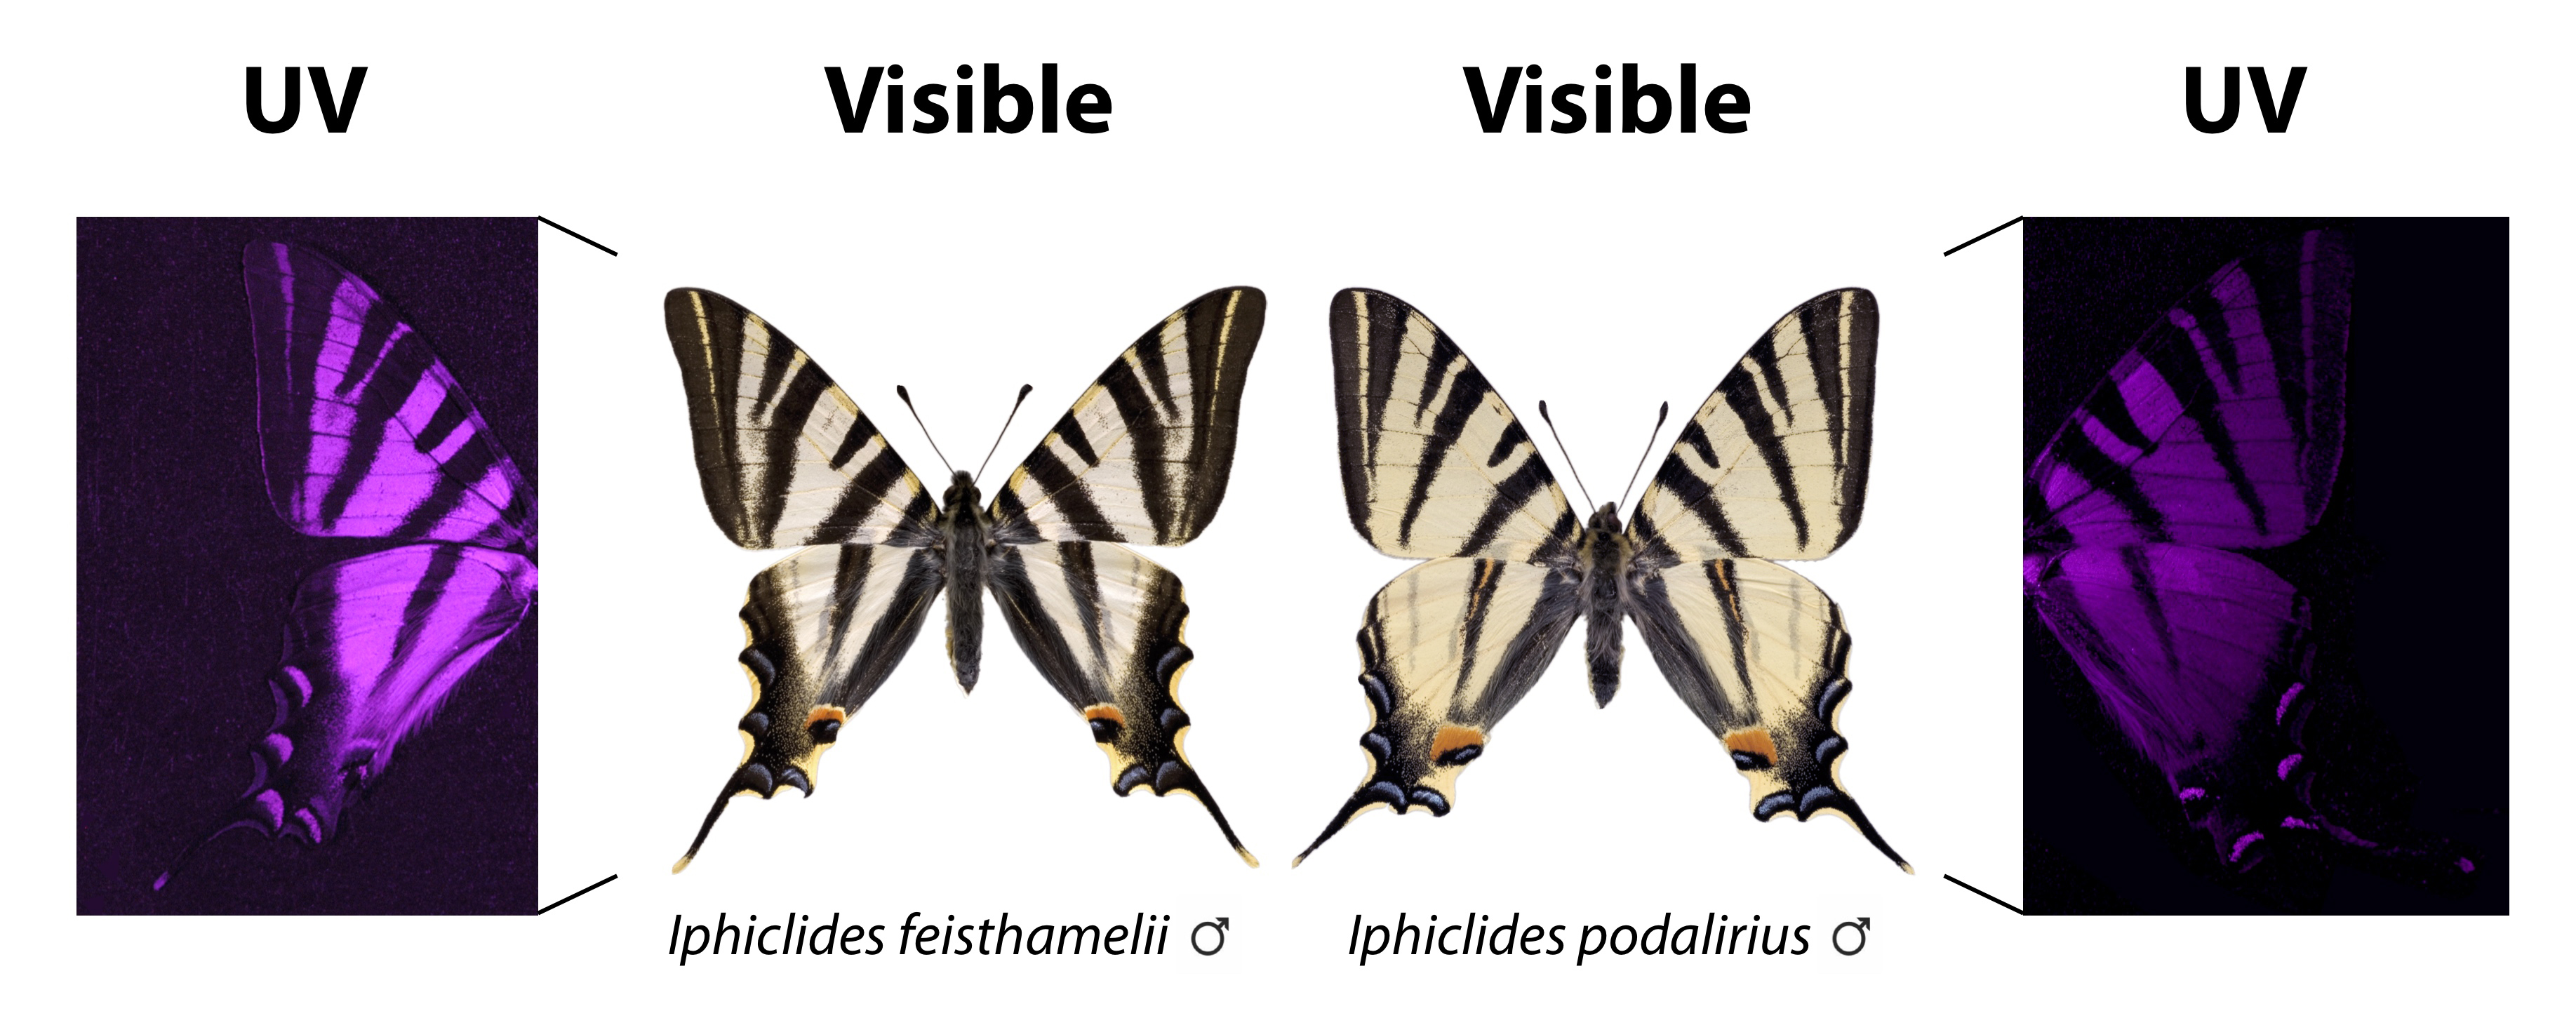 Images of southern scarce swallowtail butterfly (left) and scarce swallowtail (right) obtained with visible and UV photography. The subtle differences in the visible pattern of the wing become surprisingly evident with UV photography. Credit: Vlad Dinca